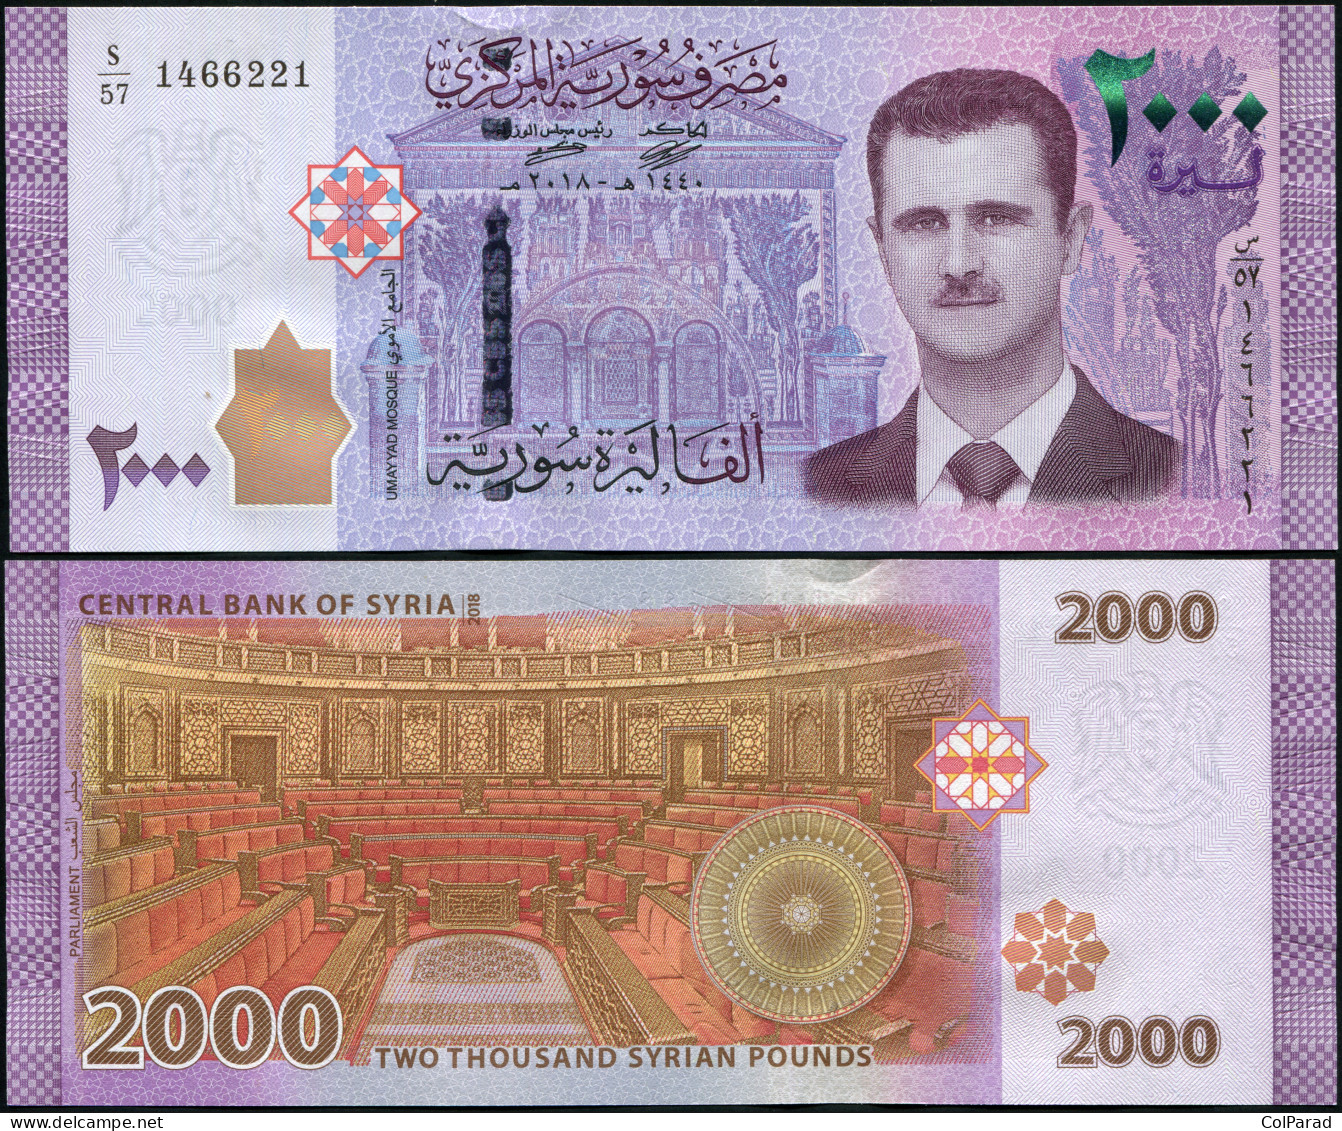 SYRIA 2000 SYRIAN POUNDS - 2018 - Paper Unc - P.117c Banknote - Syrien